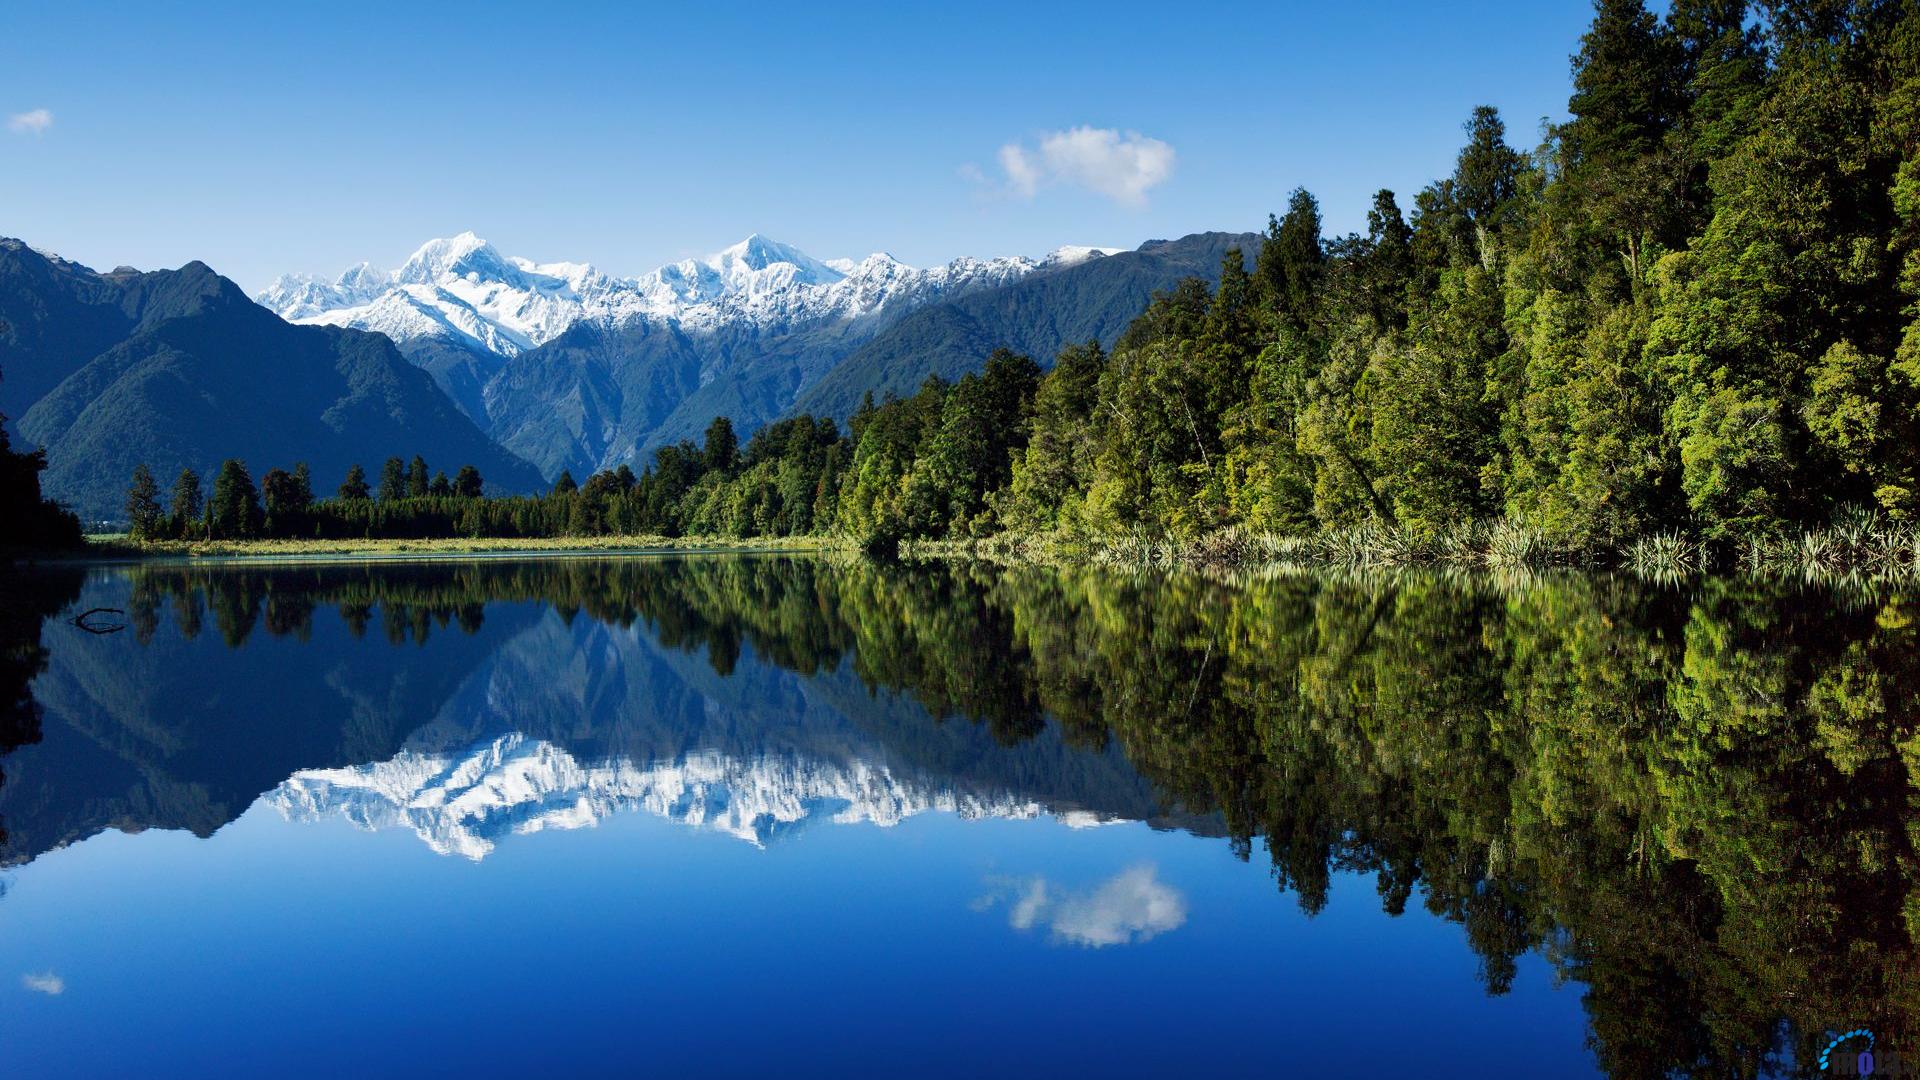 Desktop Wallpaper Mountains And Lake In New Zealand